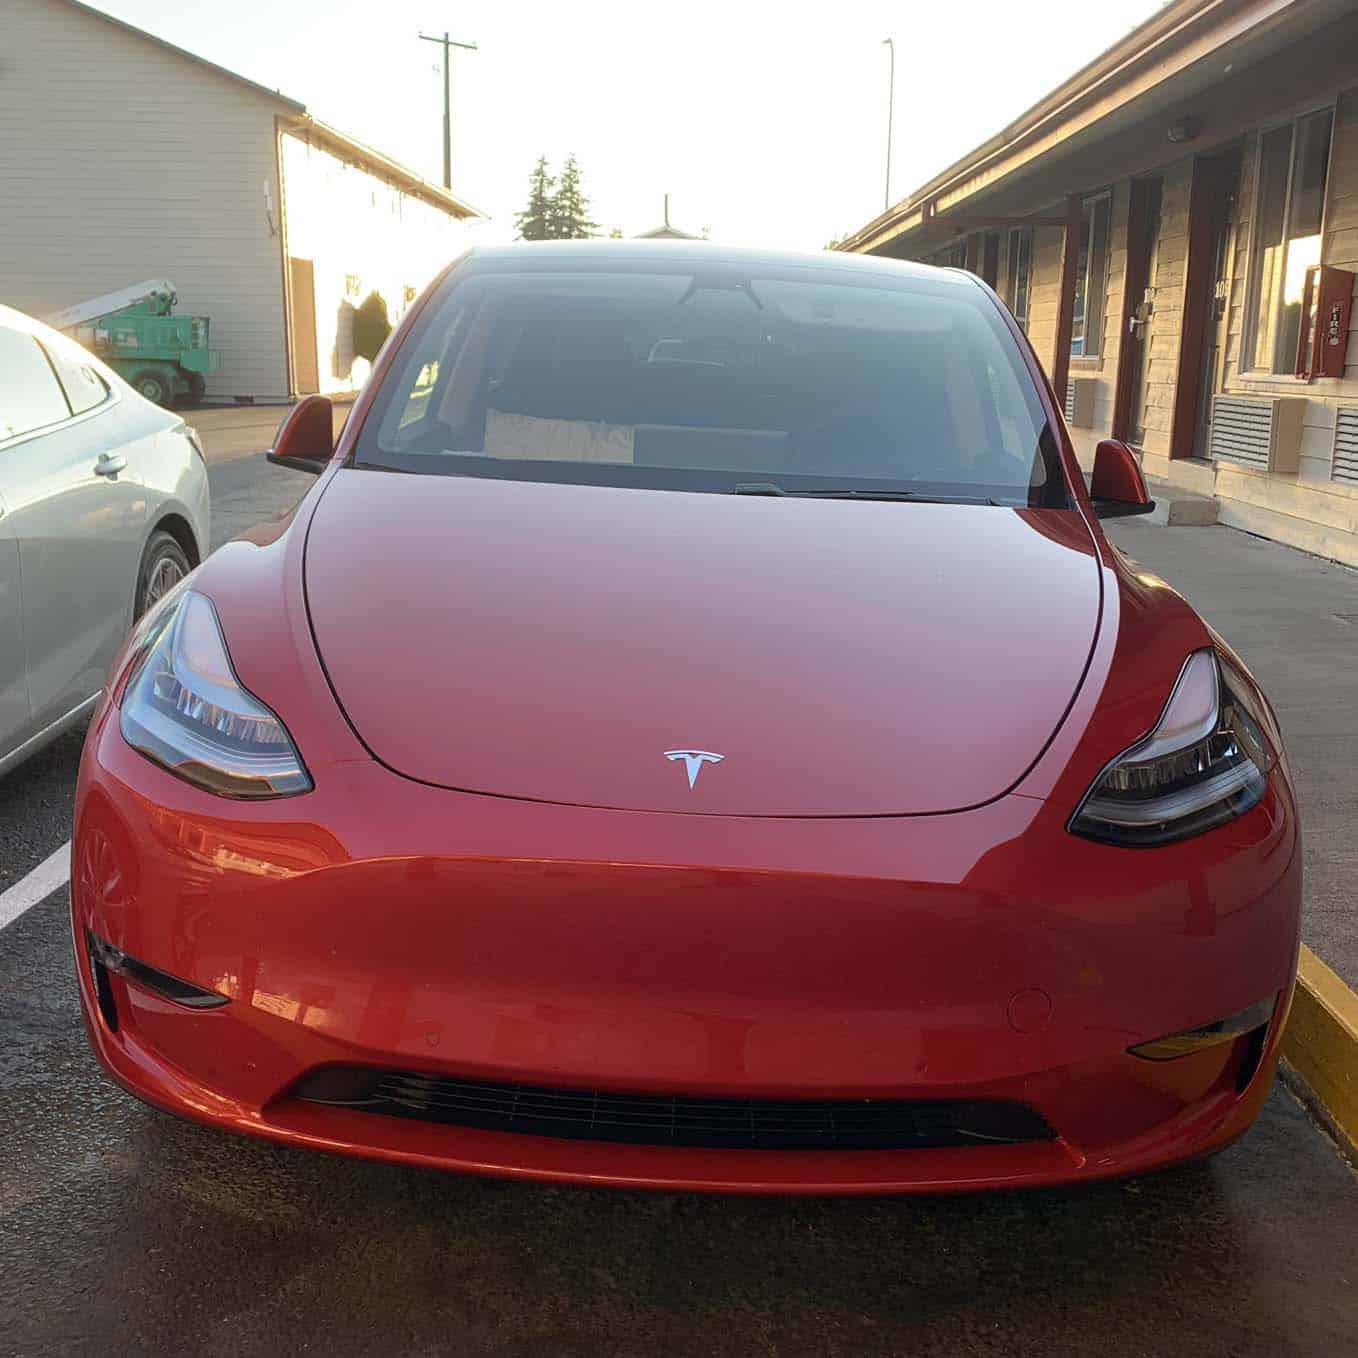 Red Tesla Y shown parked